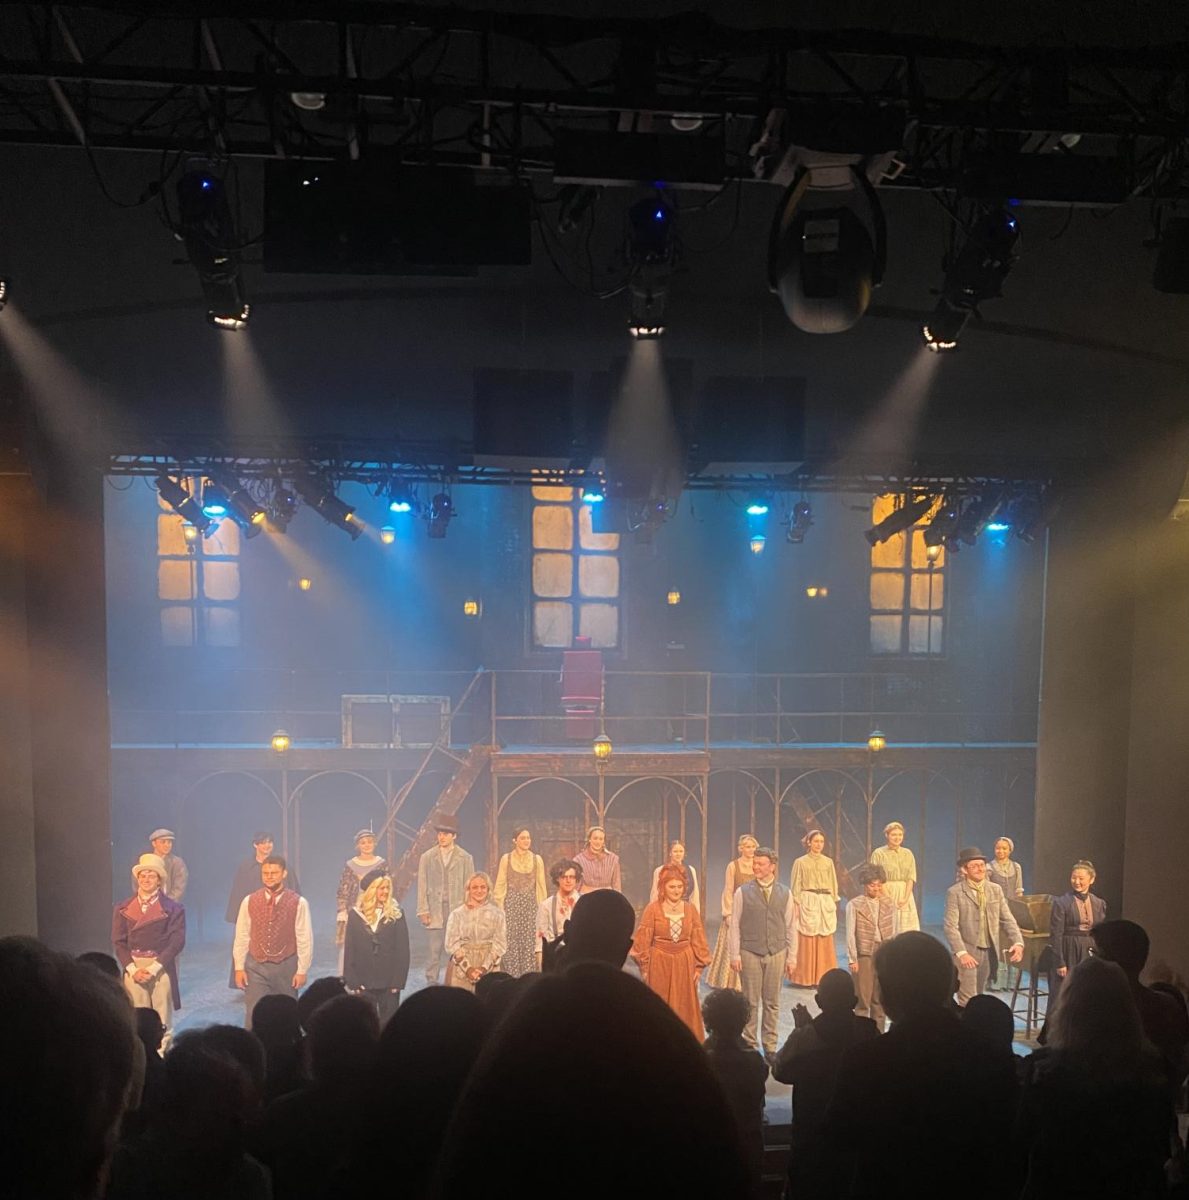 The cast of “Sweeney Todd” take a final bow after the show. The University of Arizona School of Theatre, Film and Television offers a new take on Hugh Wheelers chilling tale “Sweeney Todd.”